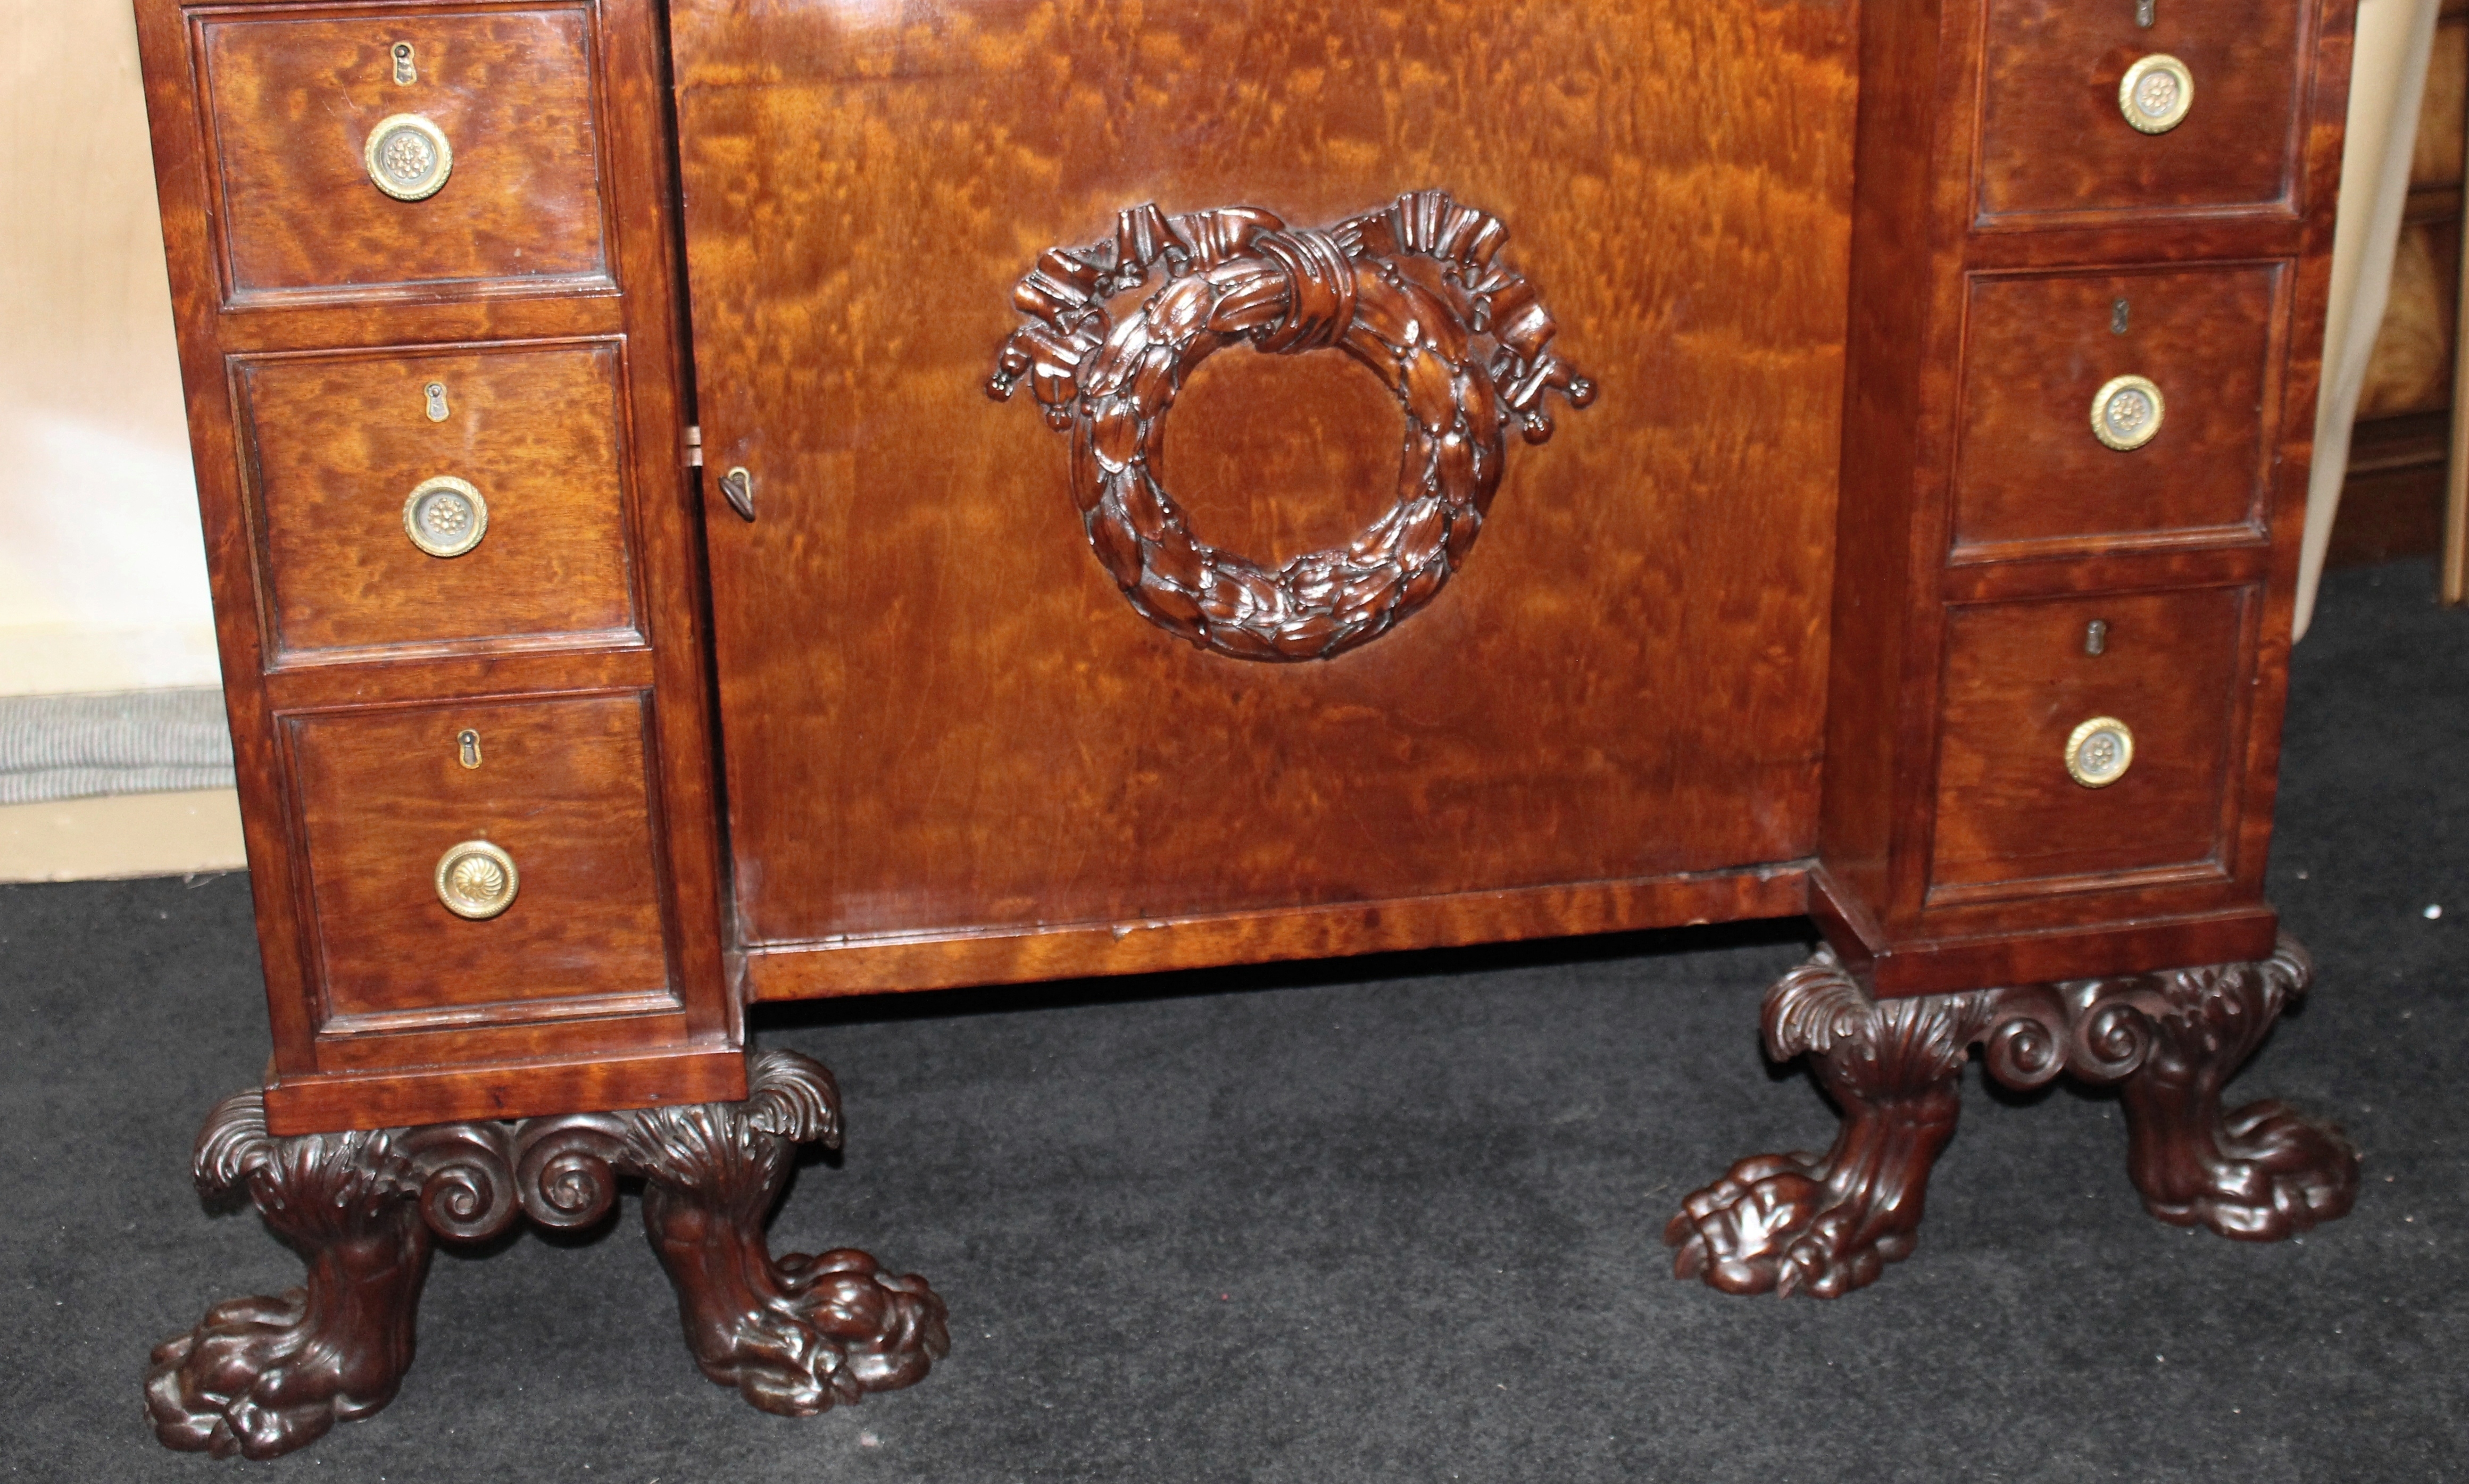 Fine Late 18th c. Mahogany Desk with Carved Feet - Image 8 of 8